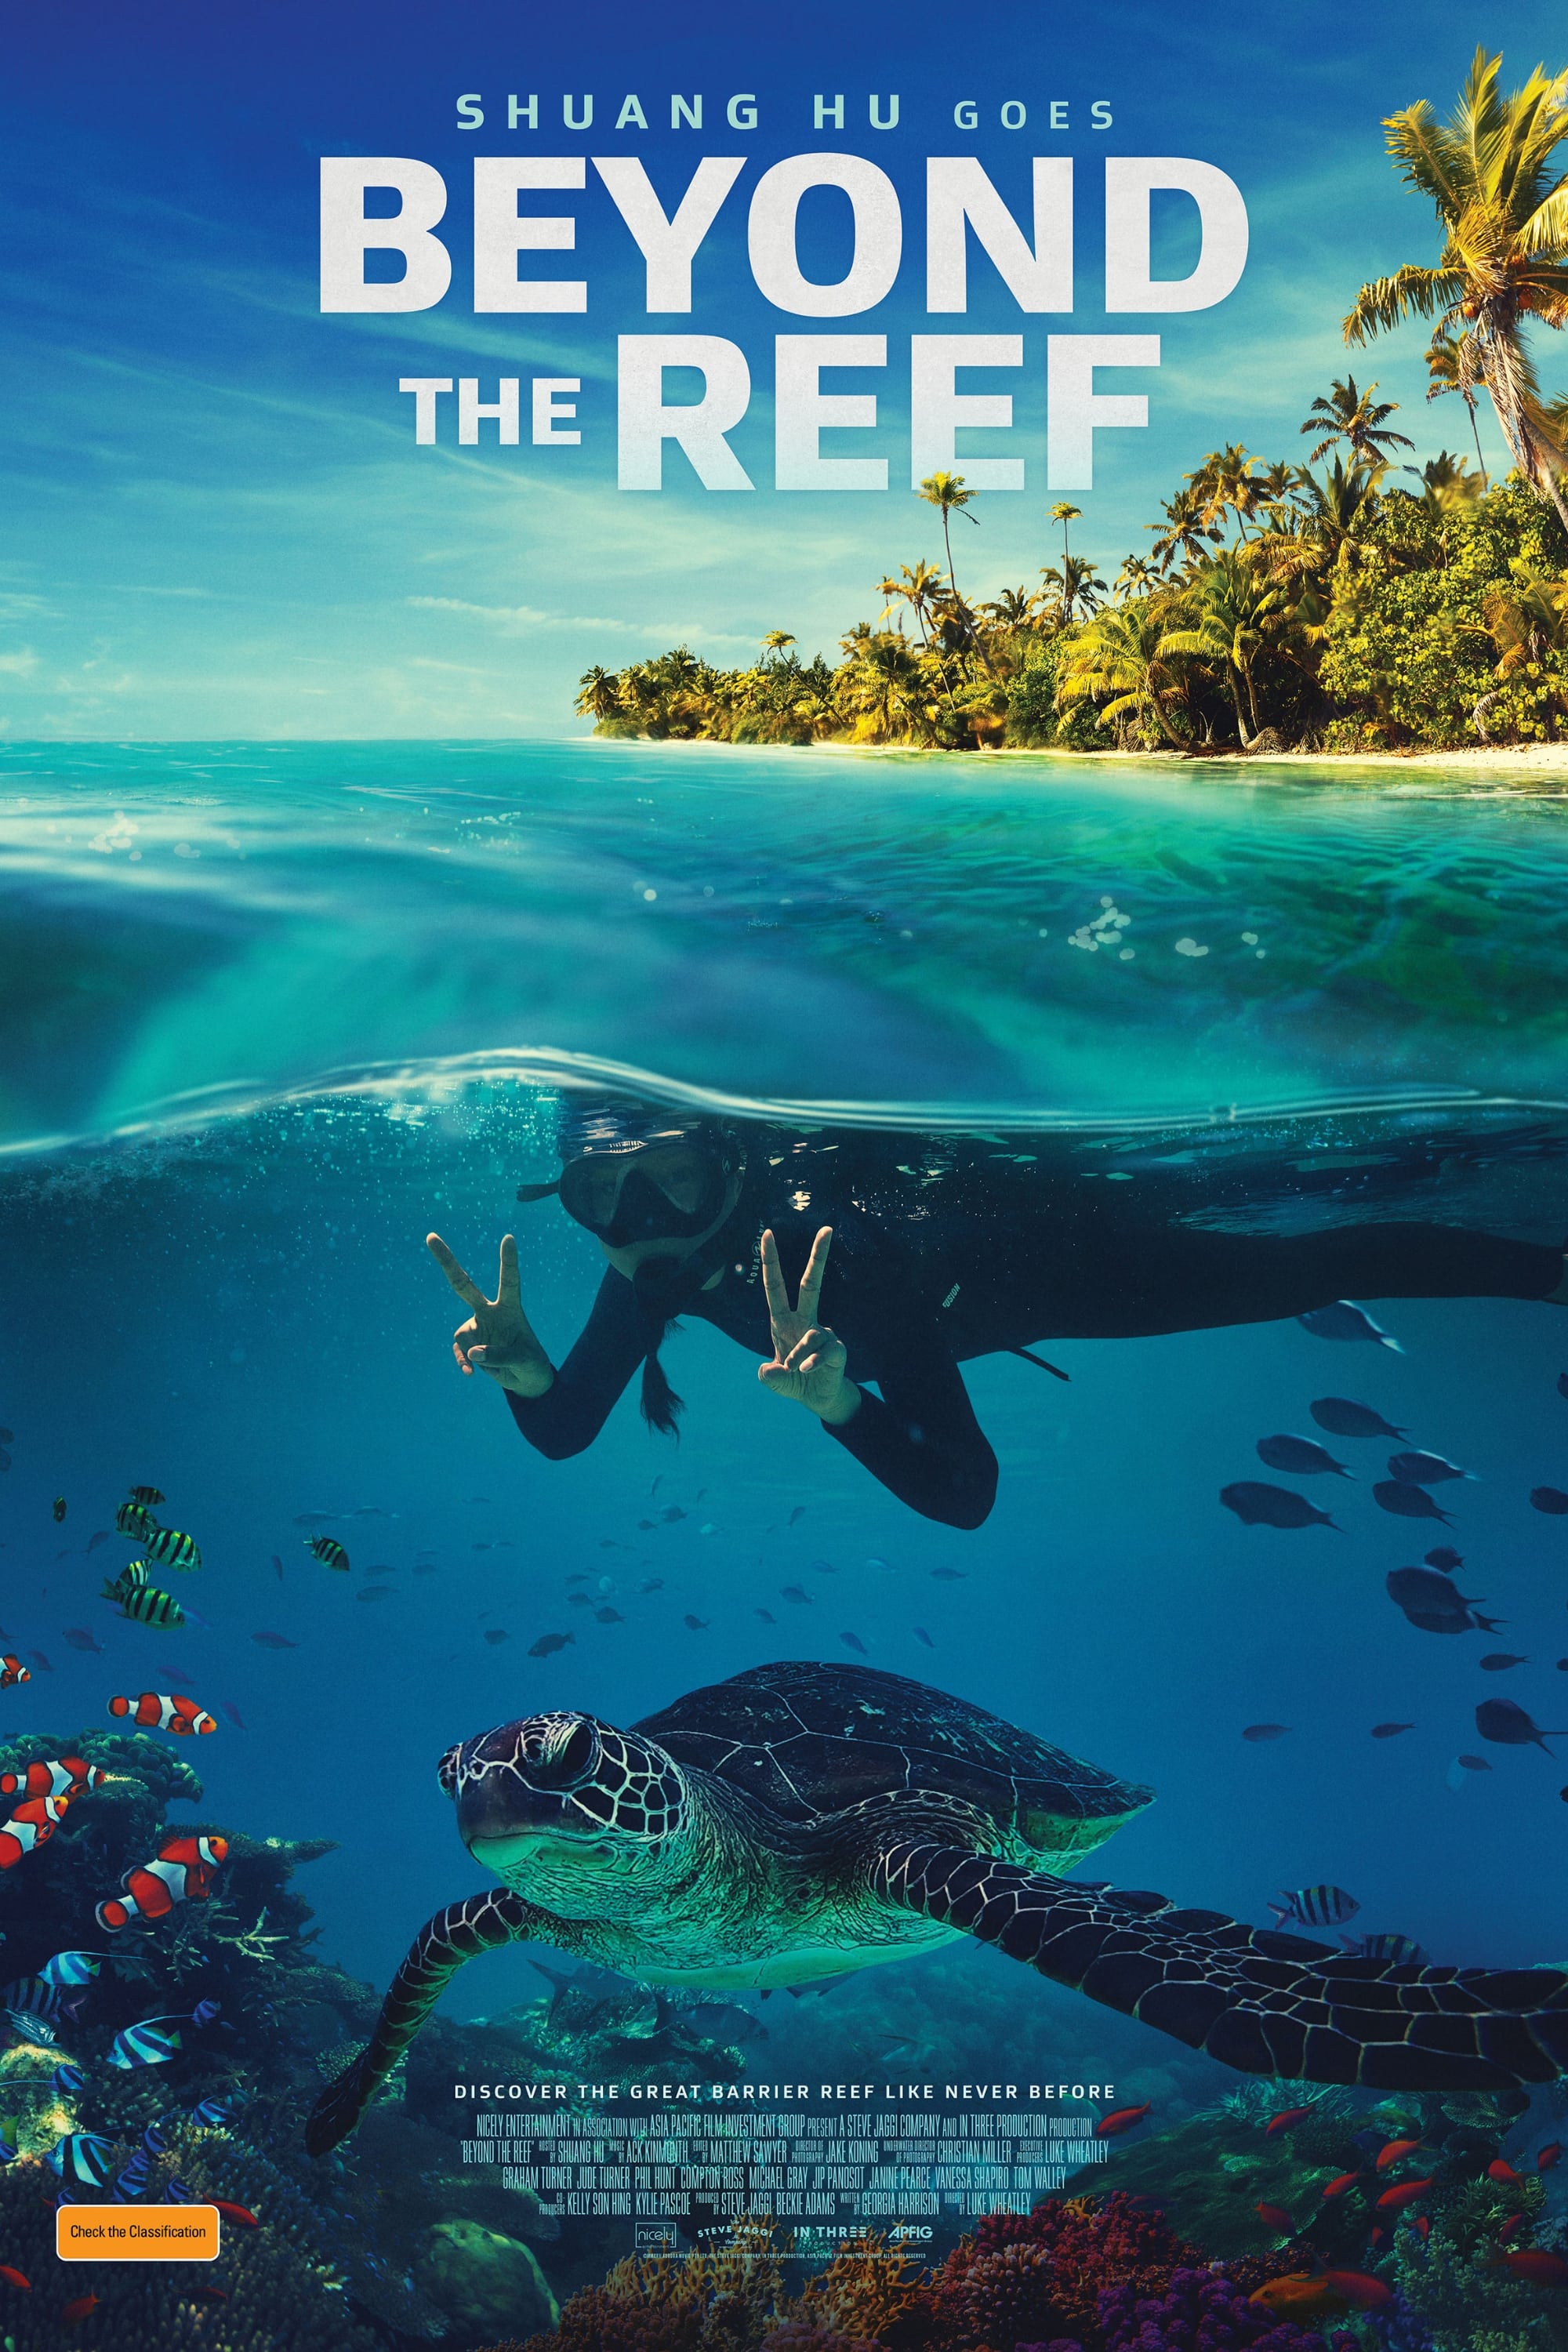 Beyond the Reef